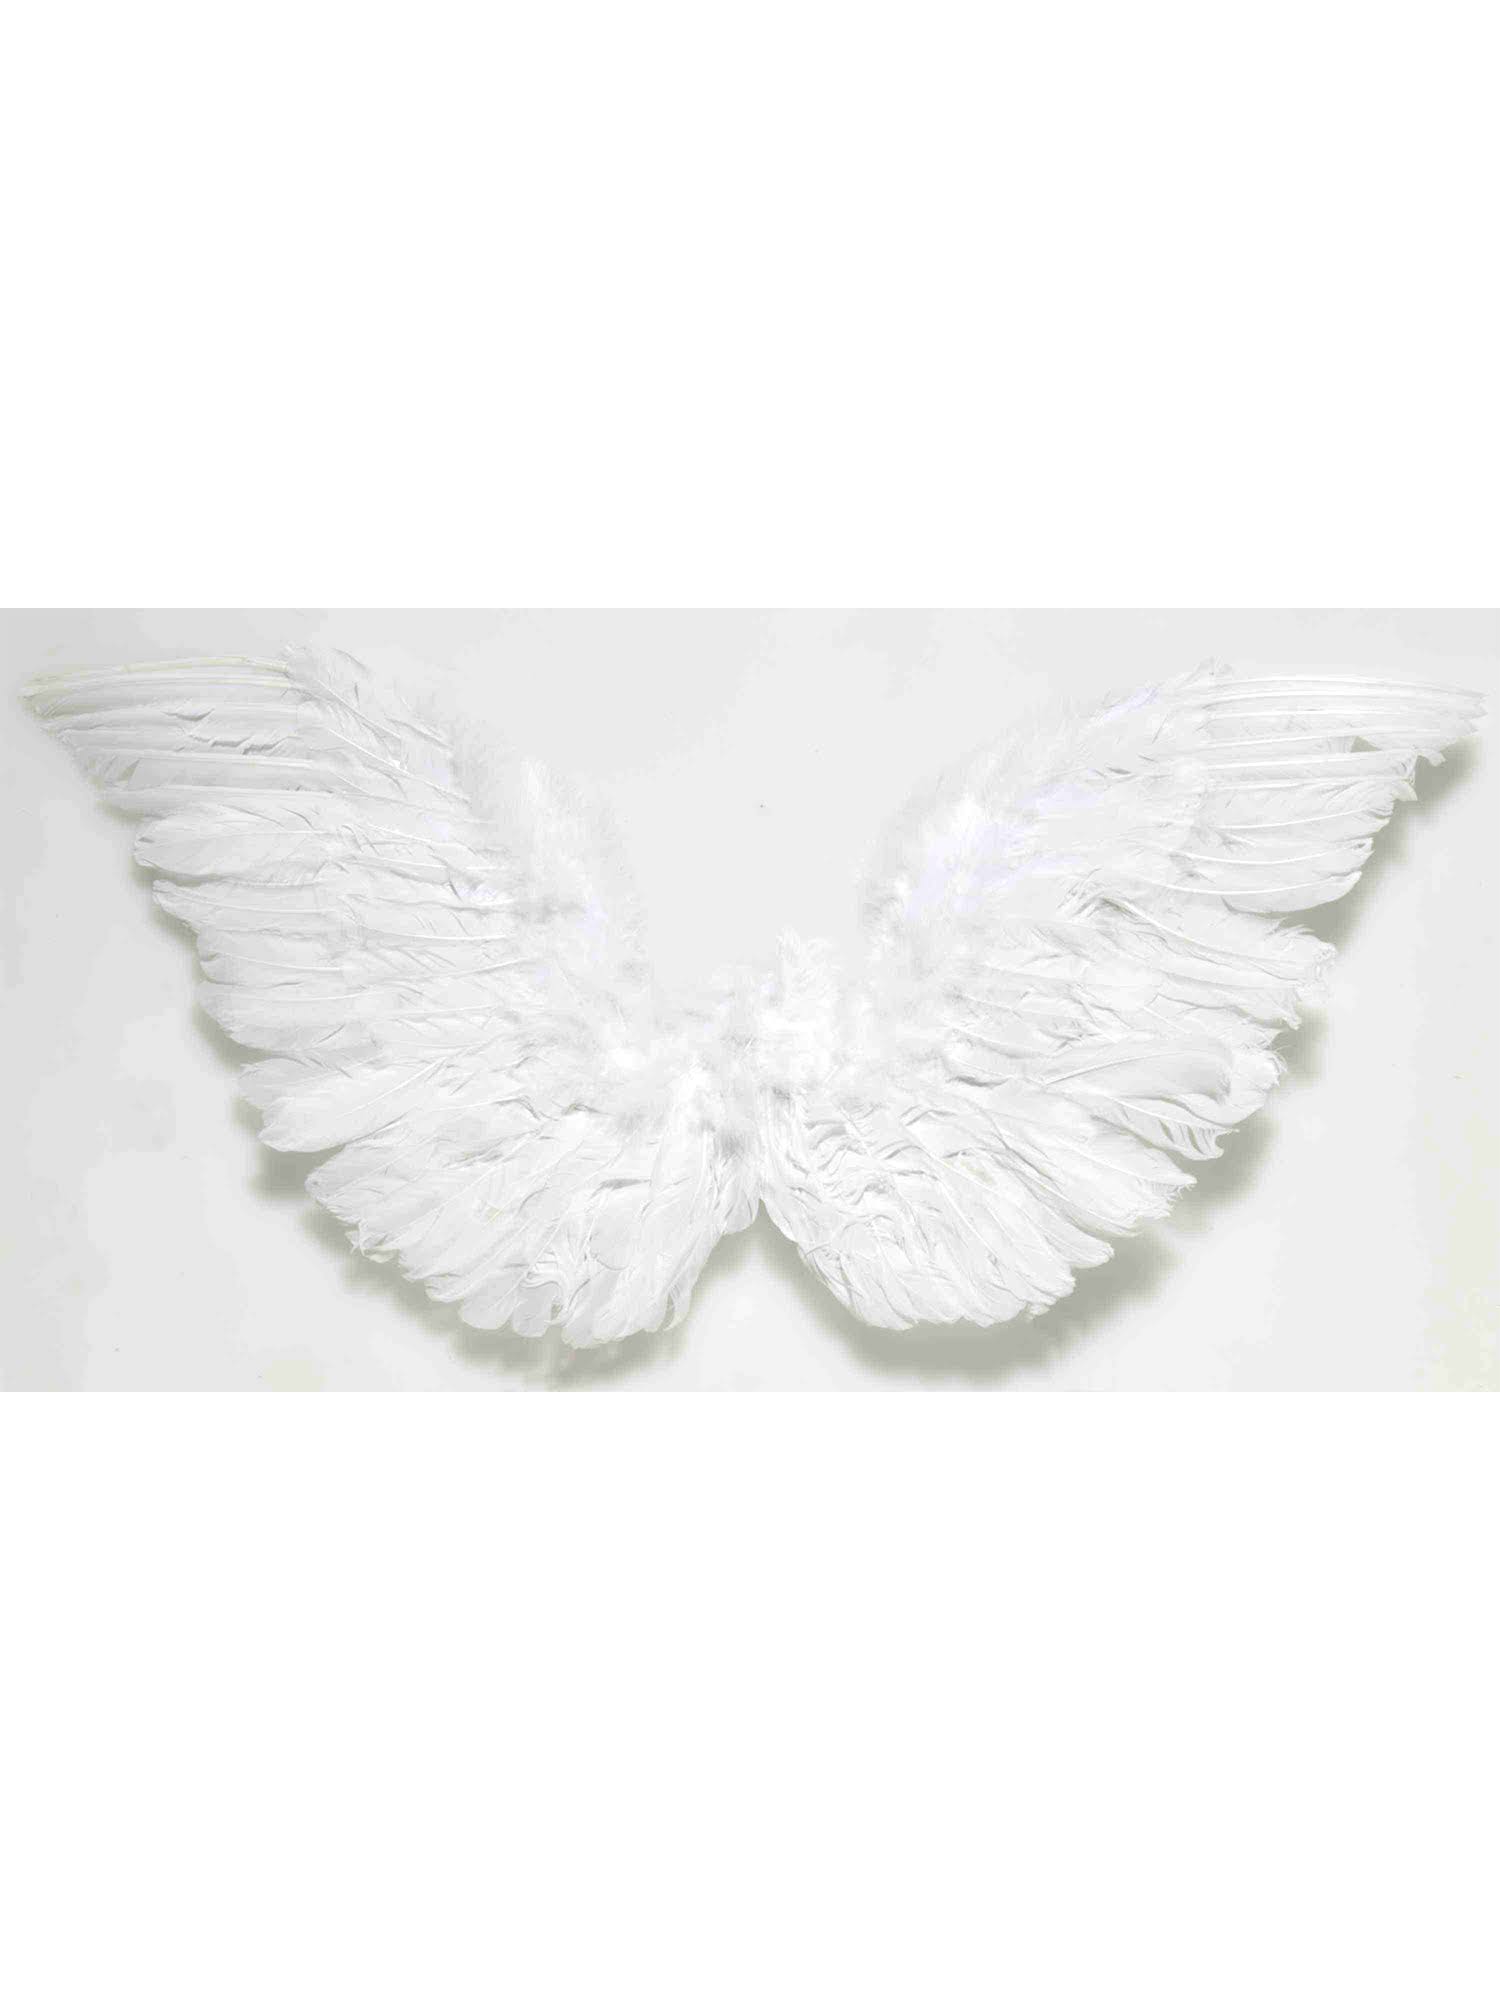 Forum Novelties Angel Feather Wings - White, Small